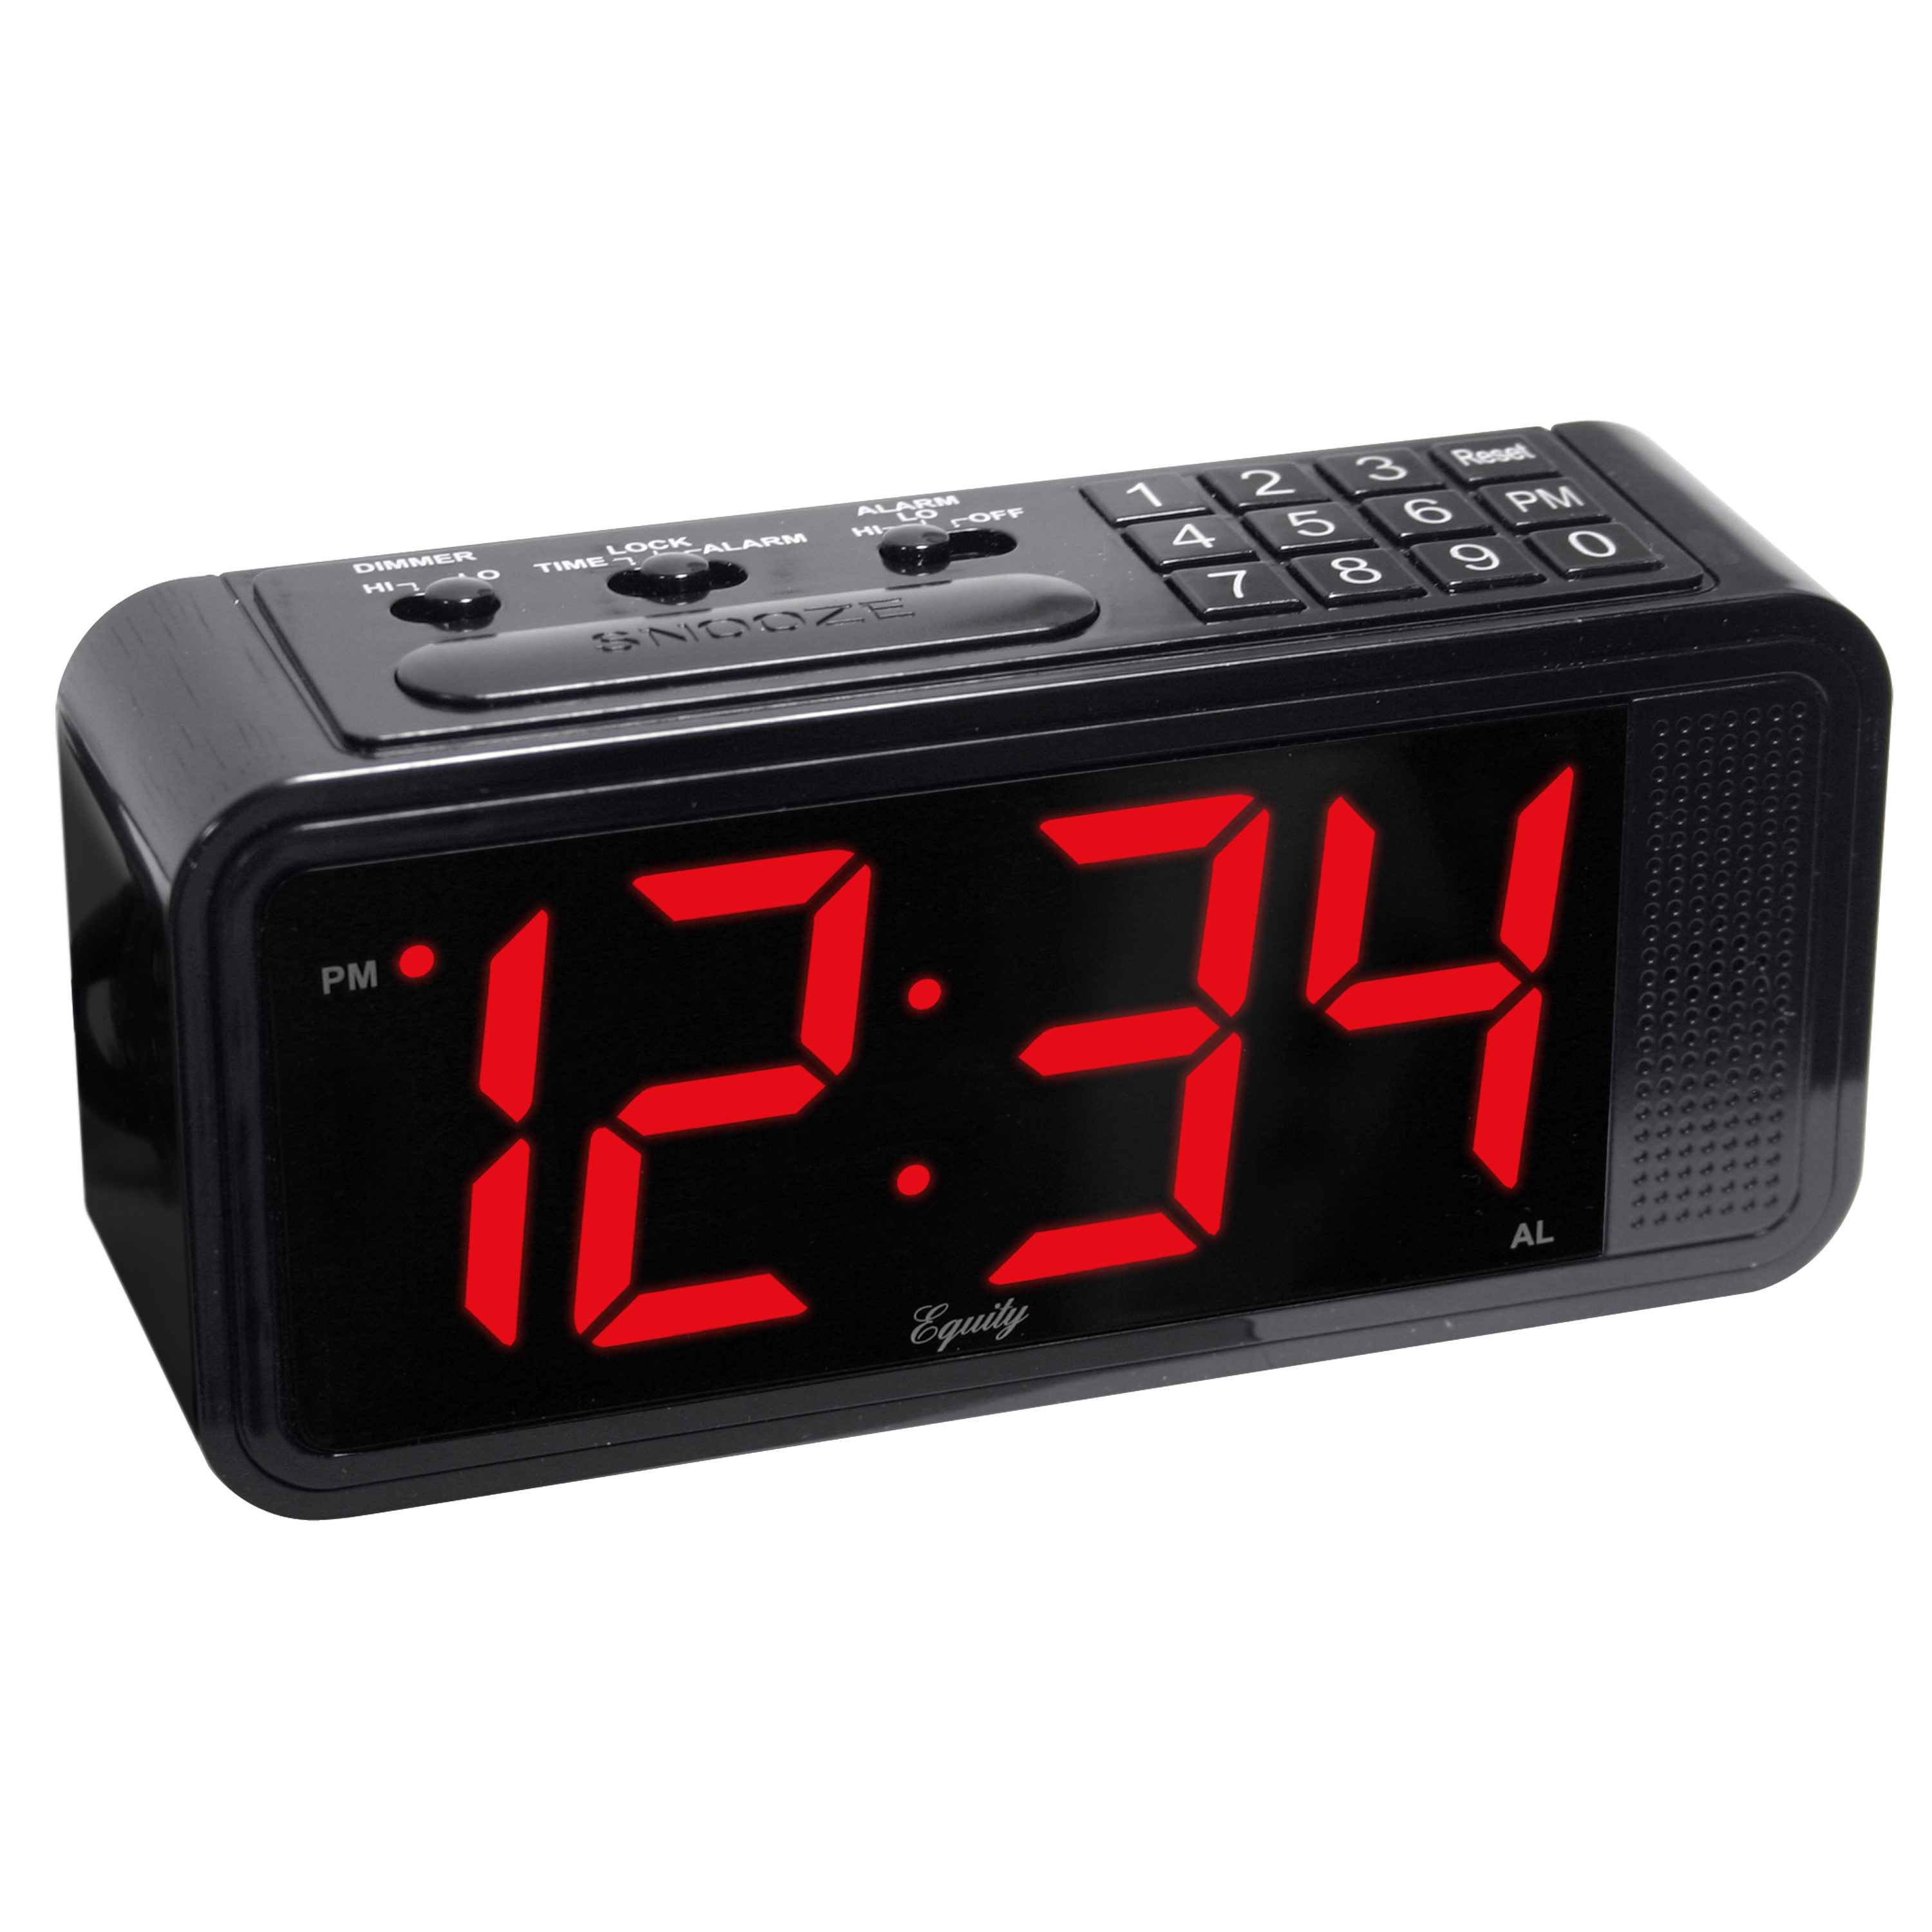 Equity by Lacrosse Quick-Set LED Alarm Clock, Black - image 2 of 2